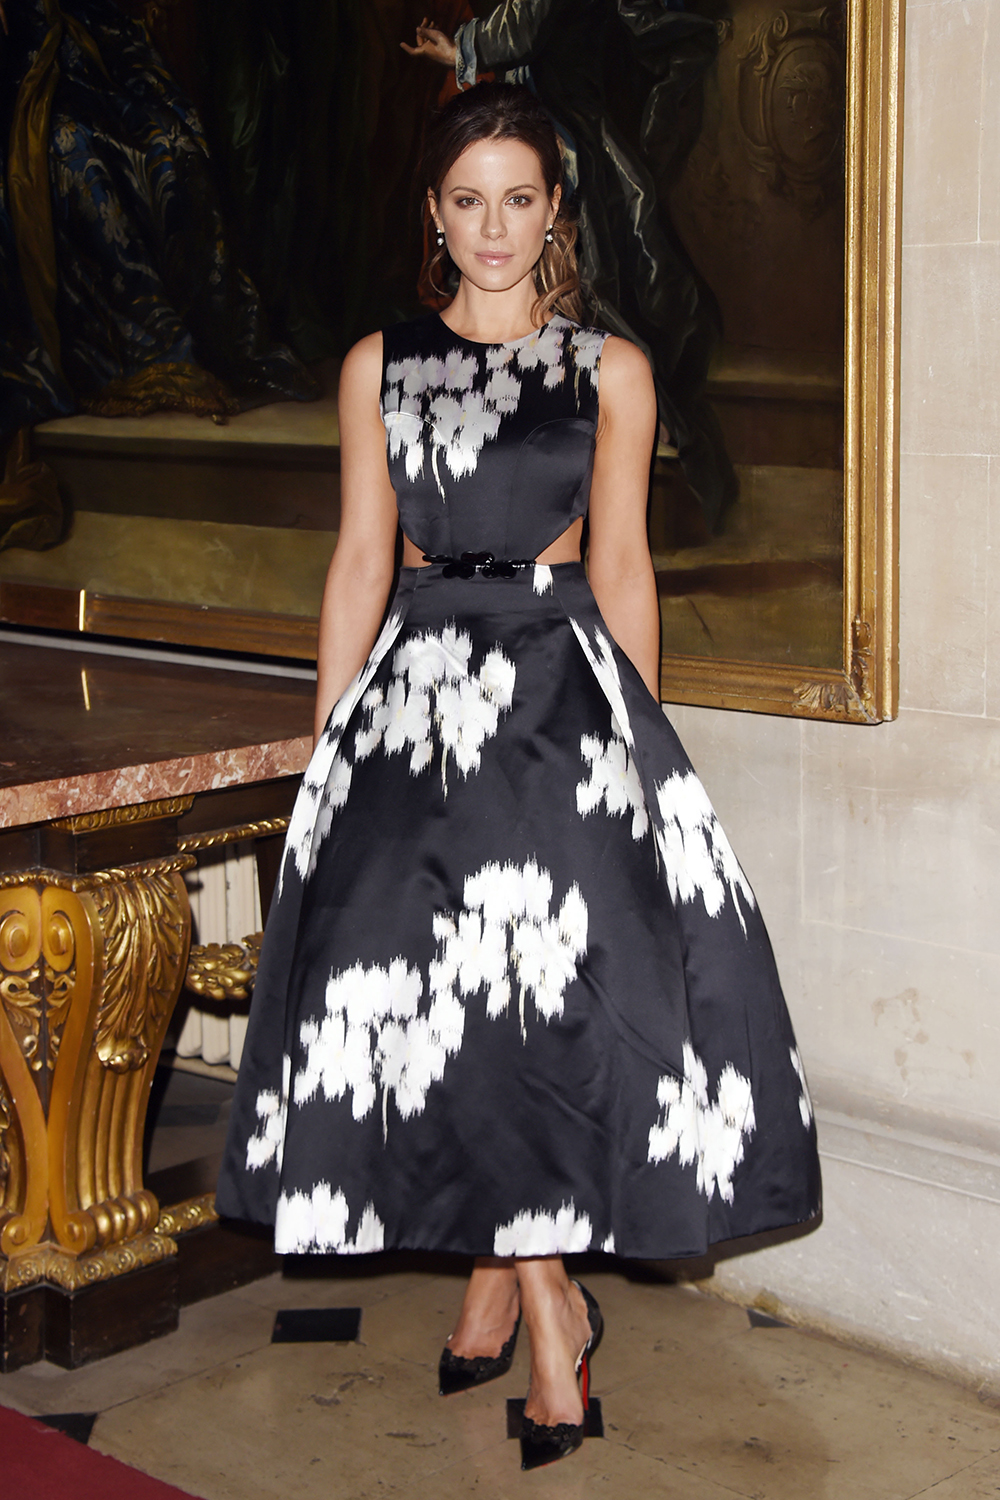 Kate Beckinsale is a classic English rose in a stunning monochrome floral Dior dress at 2017 Cruise collection presentation at Blenheim Palace in the UK.